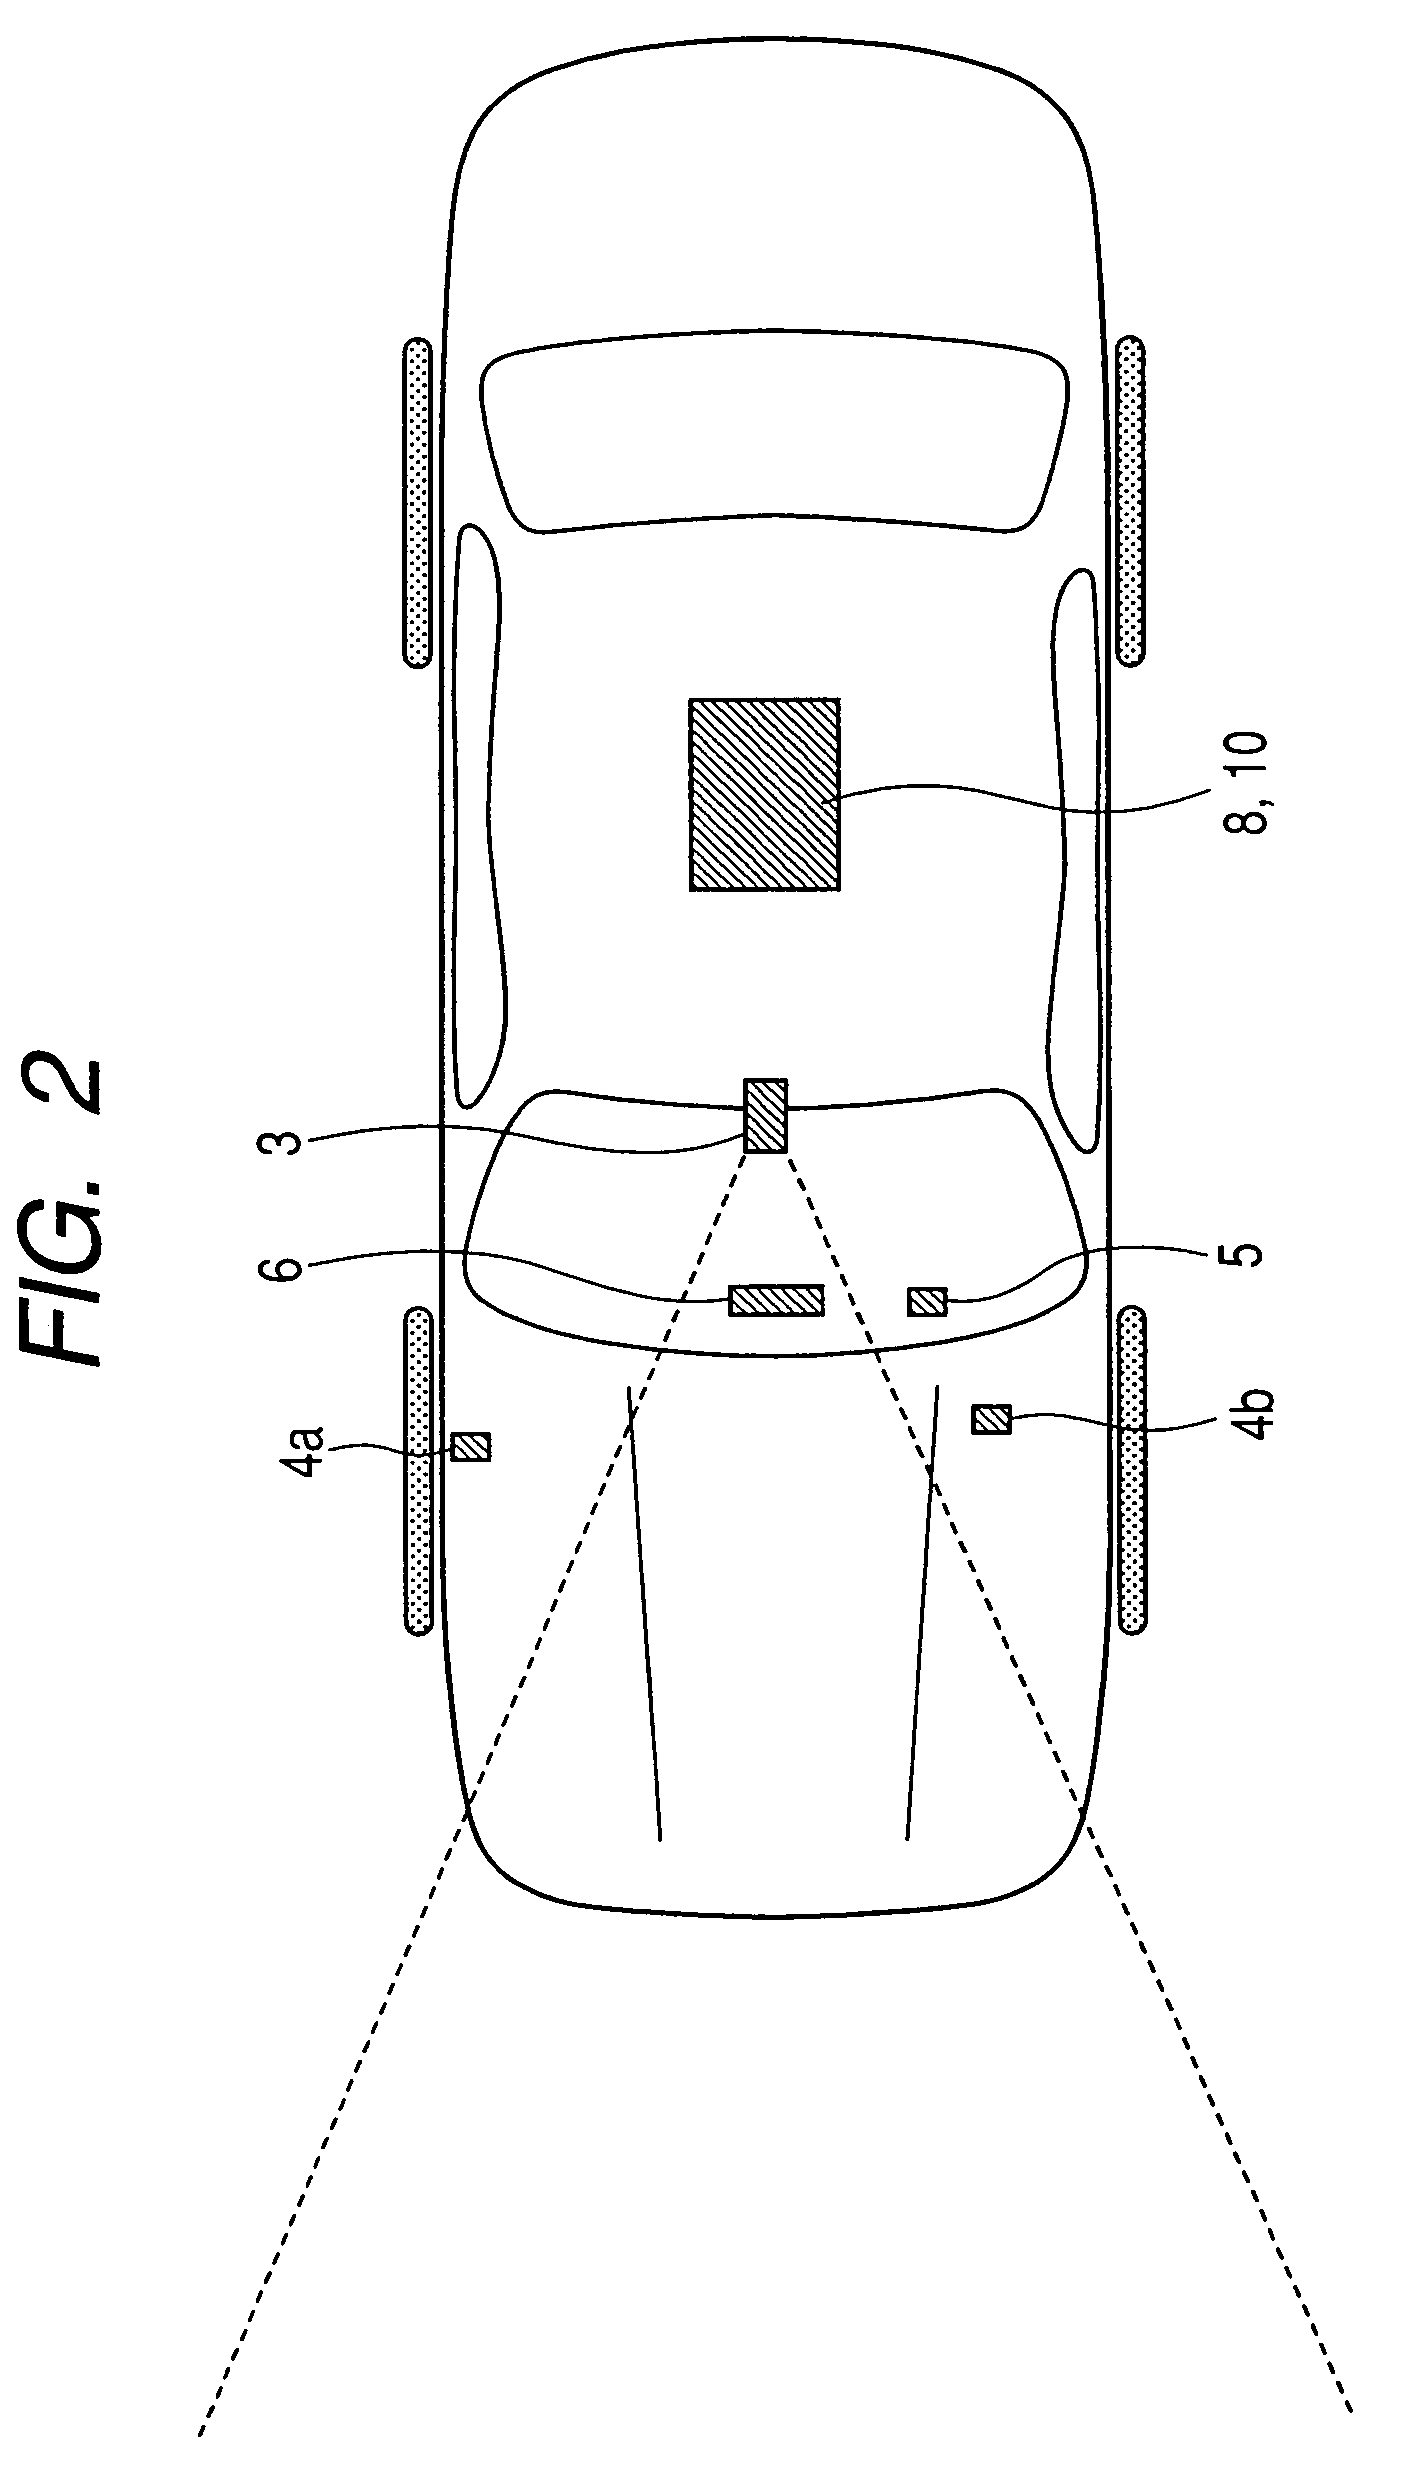 Image processing apparatus for reducing effects of fog on images obtained by vehicle-mounted camera and driver support apparatus which utilizes resultant processed images